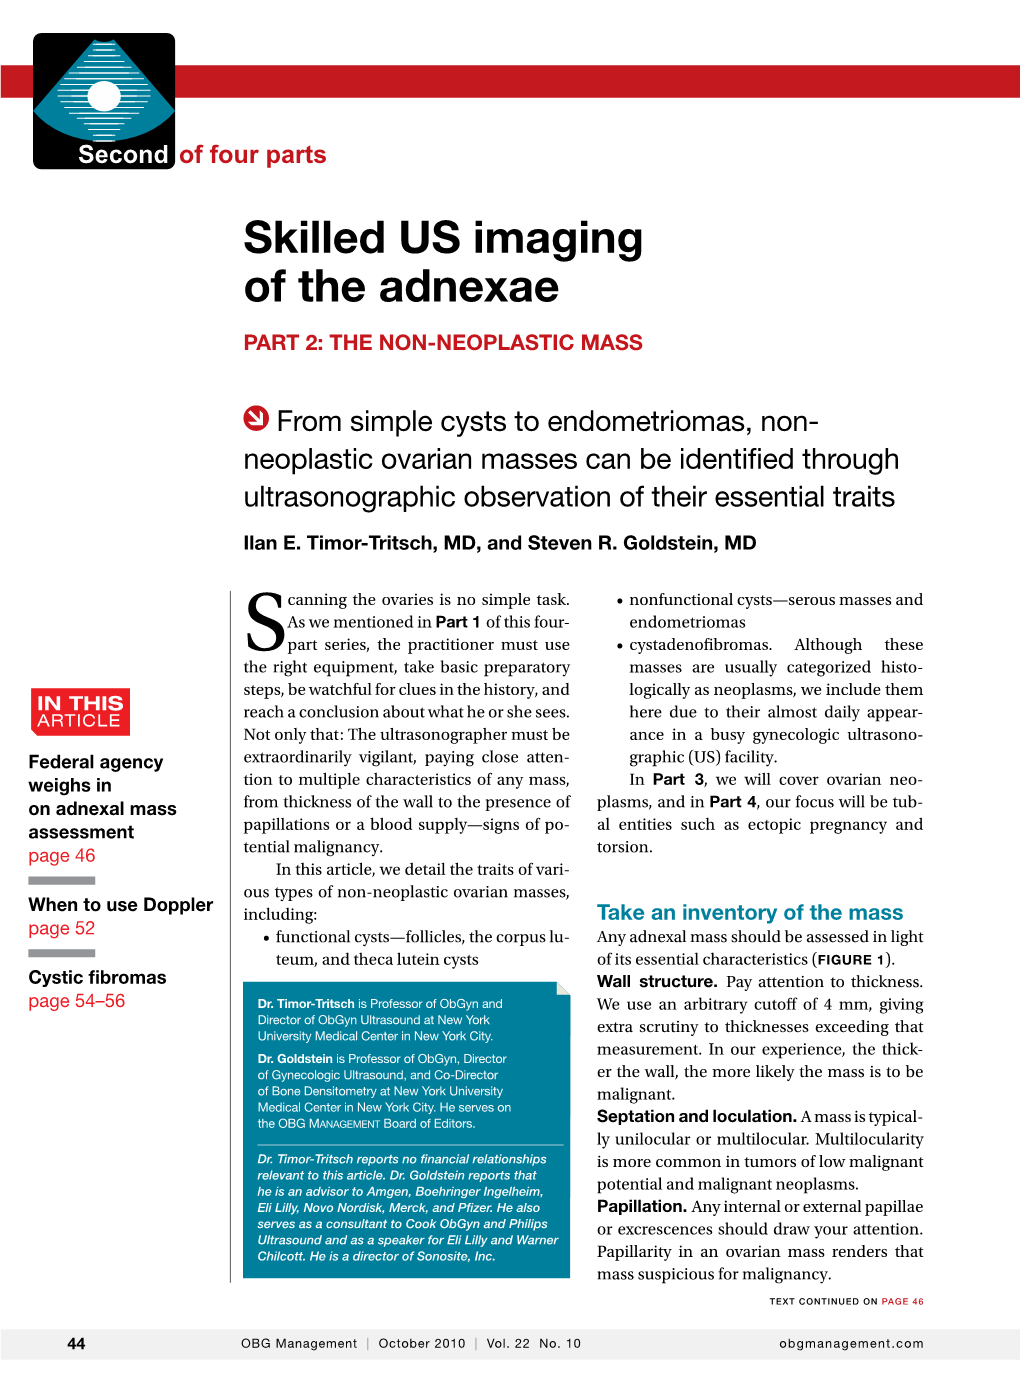 Skilled US Imaging of the Adnexae